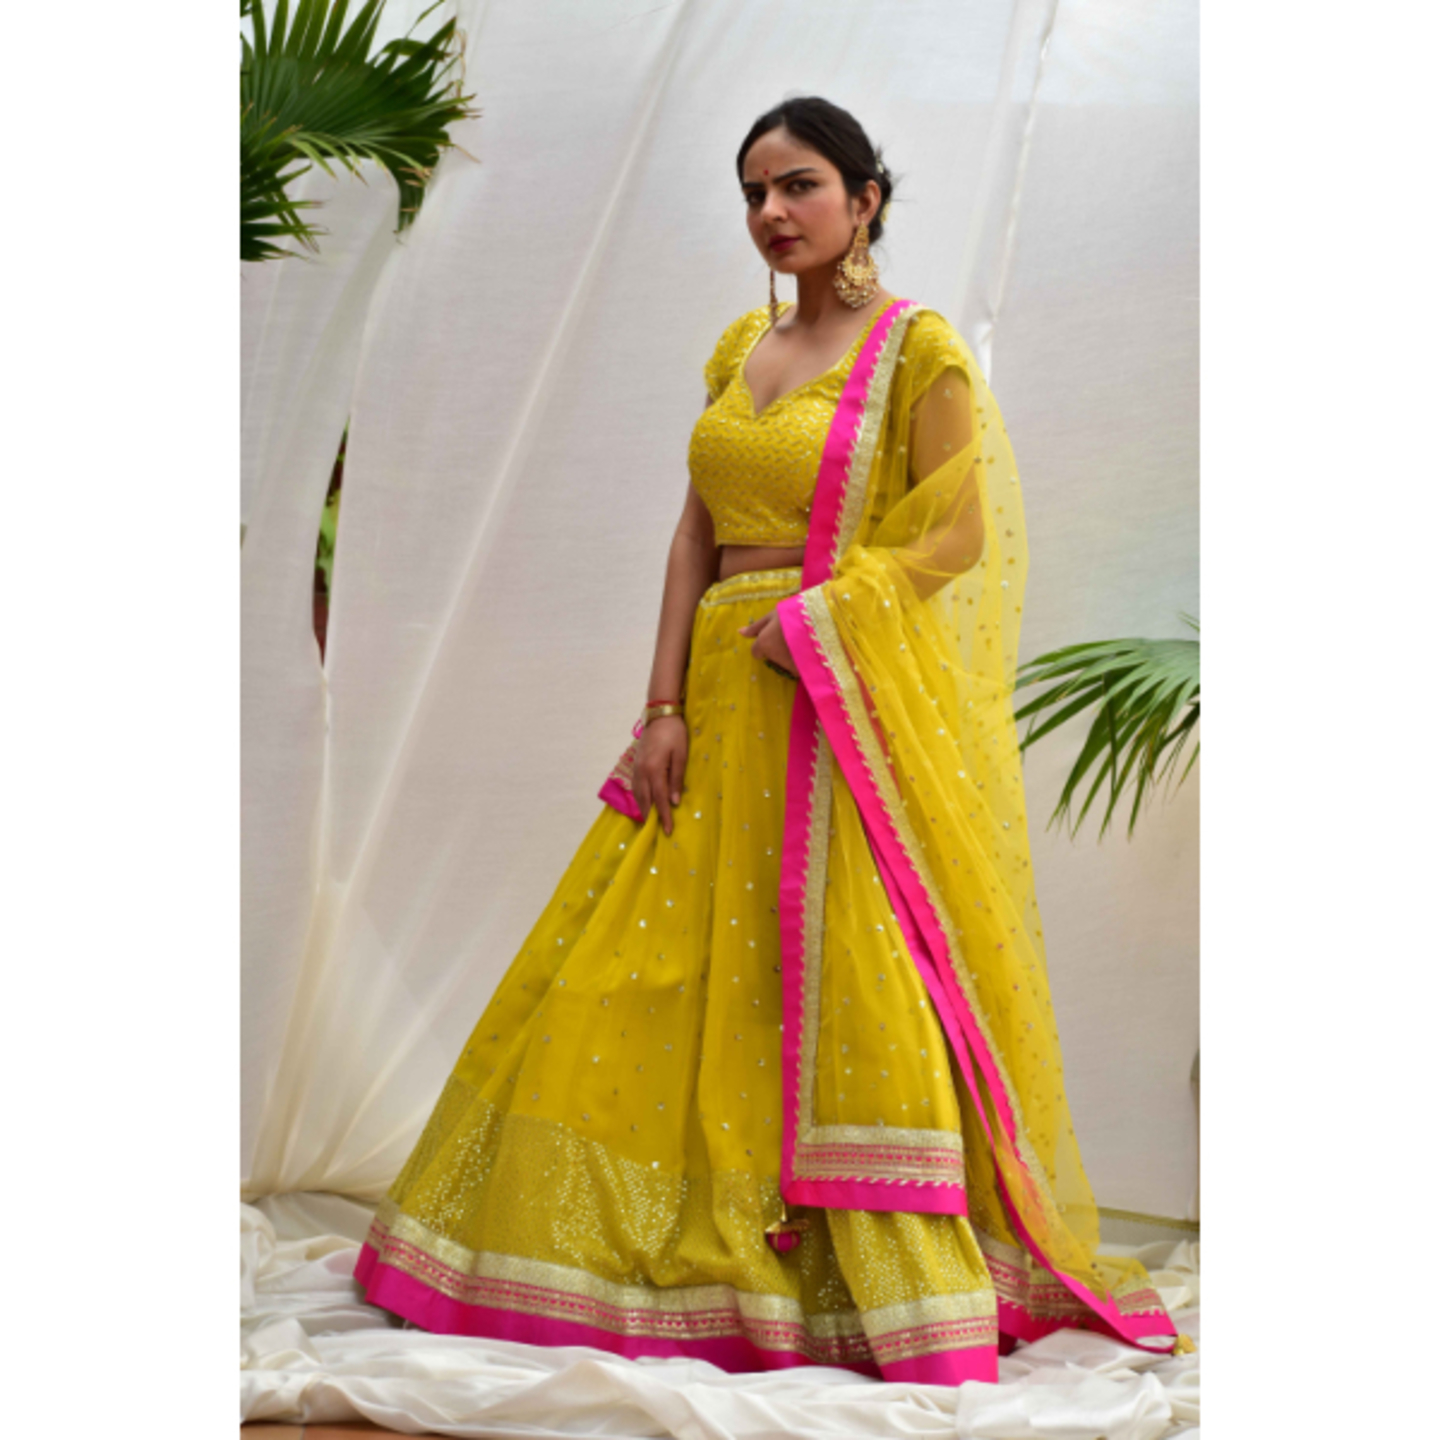 NOOR Canary-yellow Lehenga set in sequins embroidery with magenta detailing.